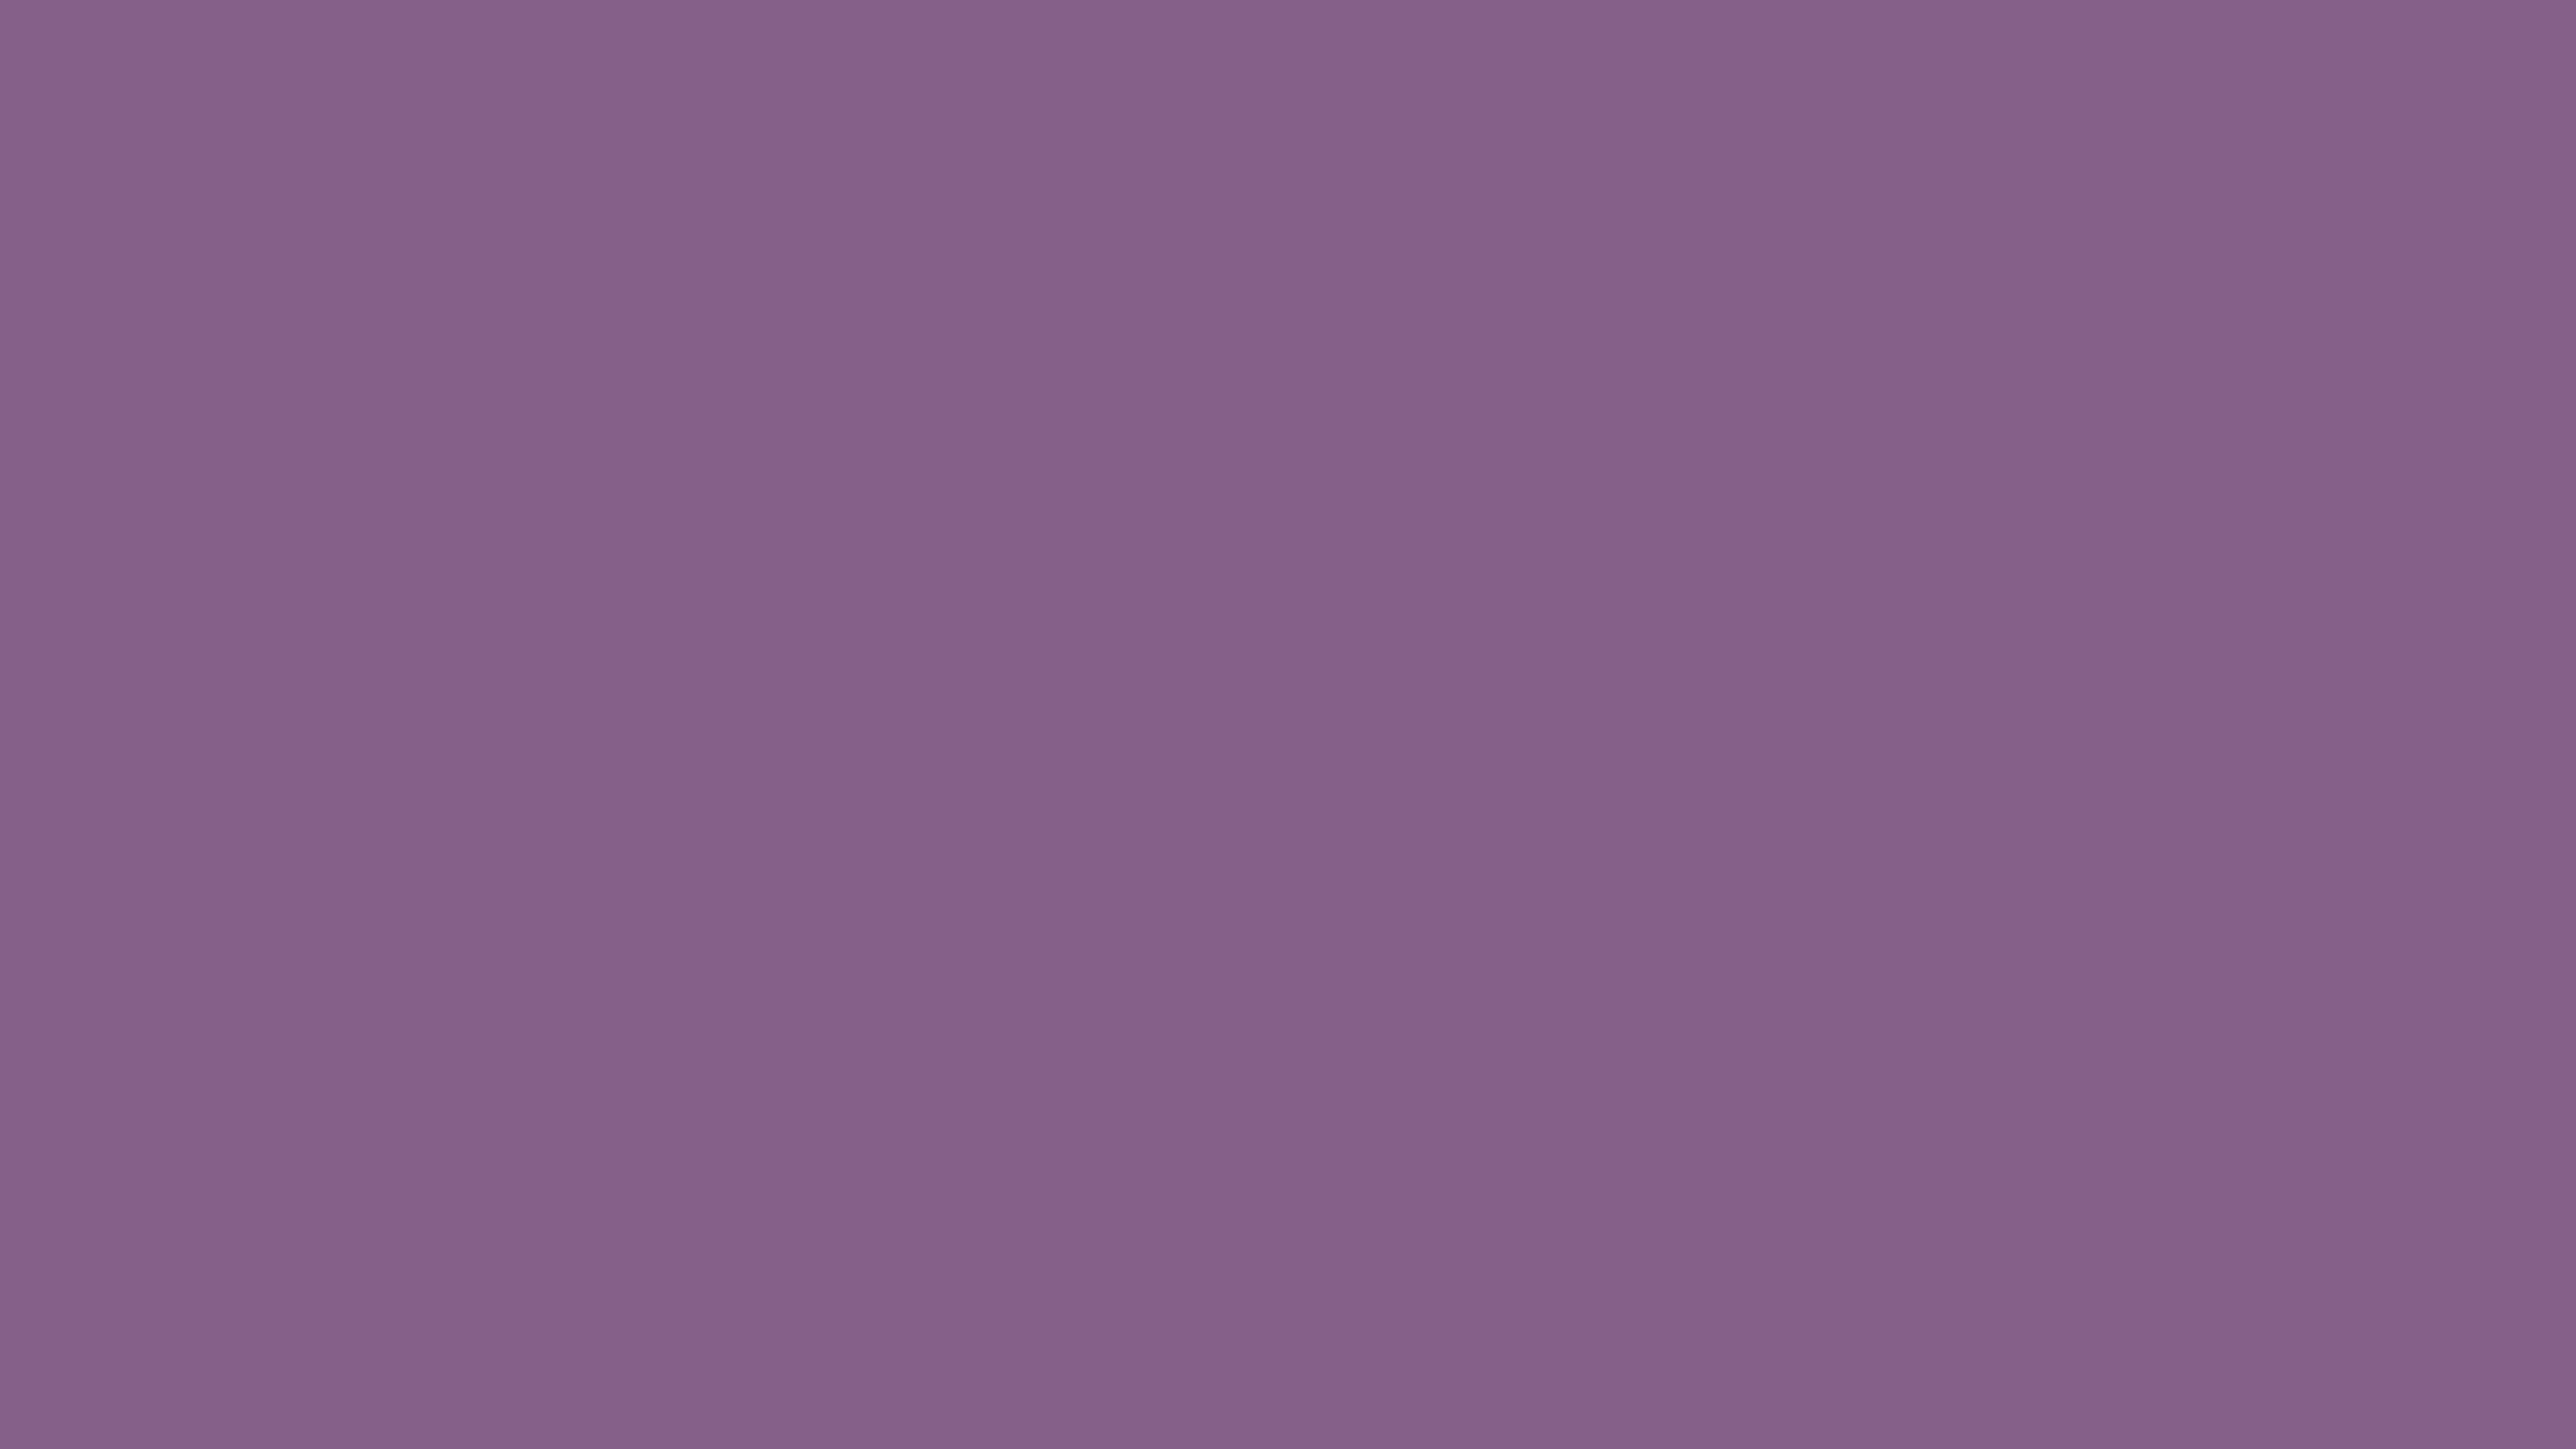 7680x4320 Chinese Violet Solid Color Background